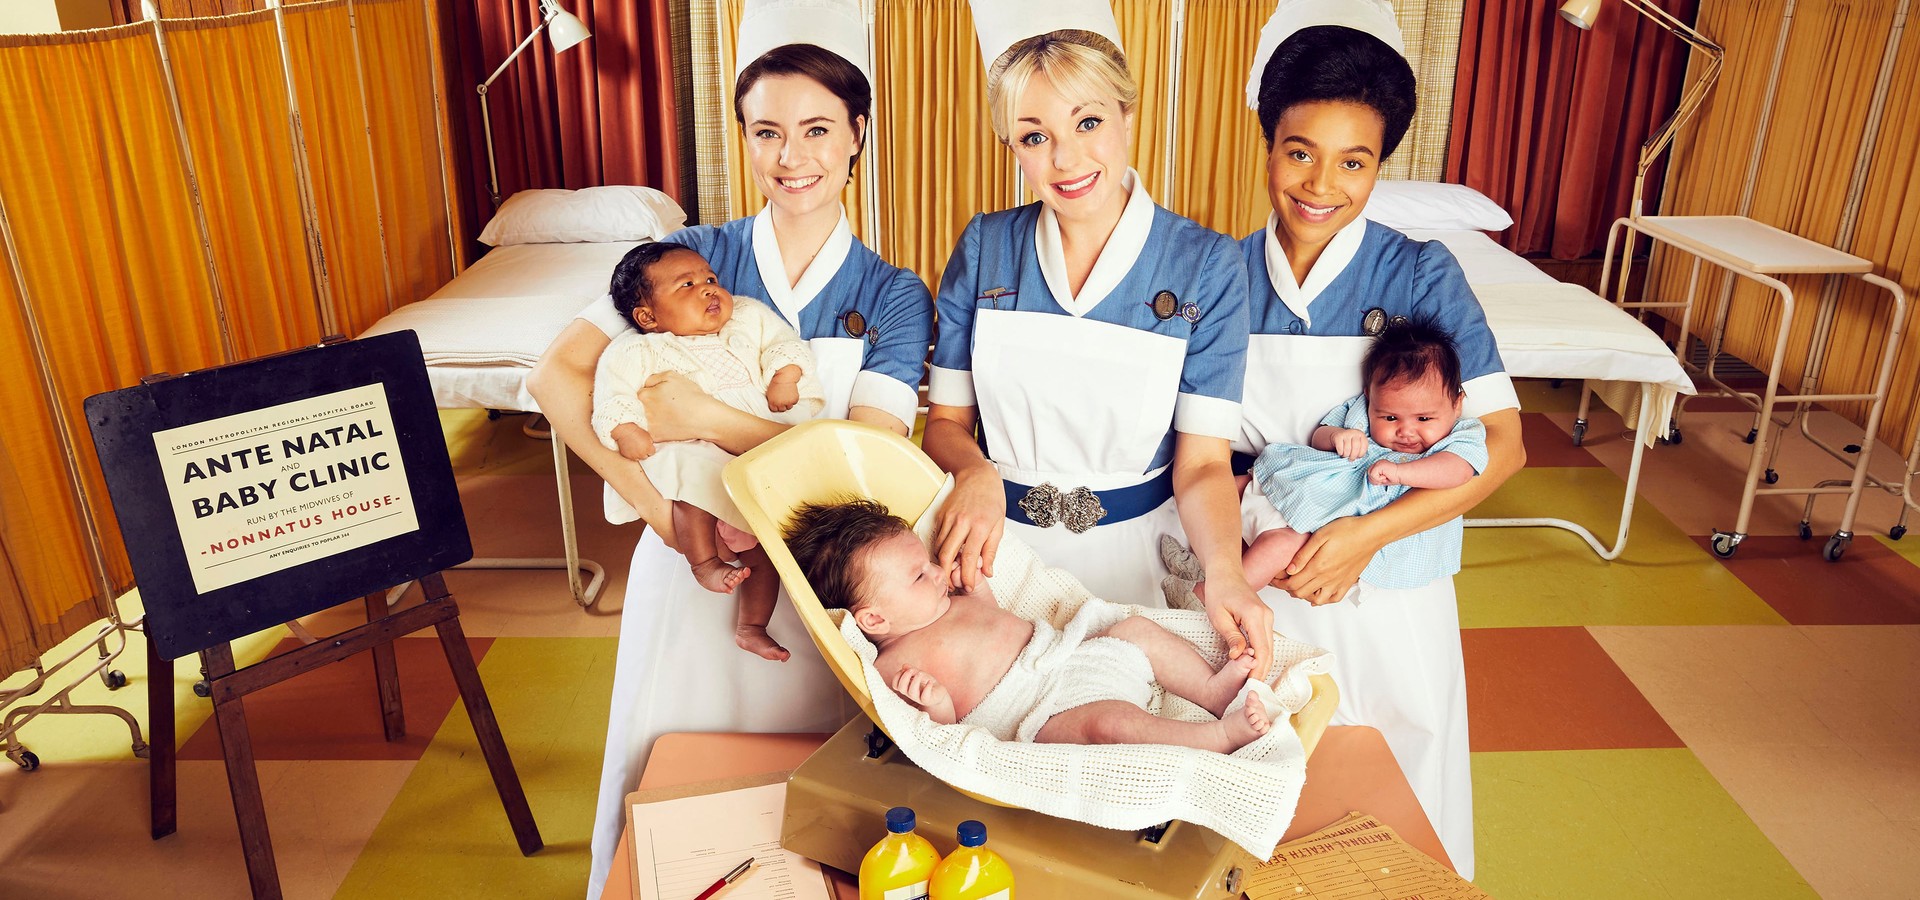 How can i watch season 9 of call the midwife Call The Midwife Season 9 Watch Episodes Streaming Online